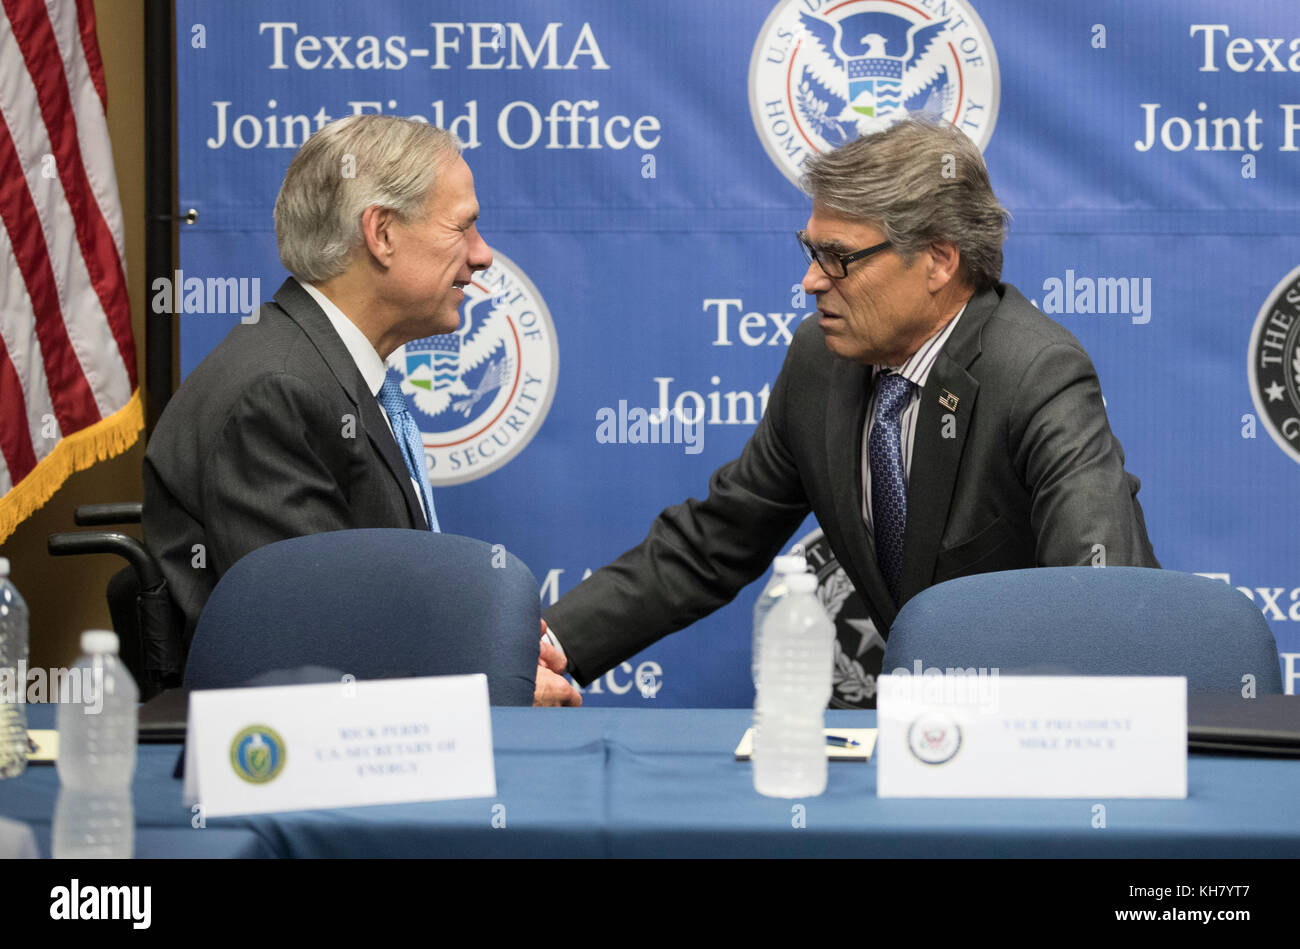 Austin, USA. 15th Nov, 2017. Texas Gov. Greg Abbott (left) and former Texas Gov. Rick Perry, now Secretary of Energy in Pres. Trump's cabinet, greet as U.S. Vice President Mike Pence visits Federal Emergency Management Agency (FEMA) Texas regional office for a Hurricane Harvey recovery update from Abbott. Credit: Bob Daemmrich/Alamy Live News Stock Photo